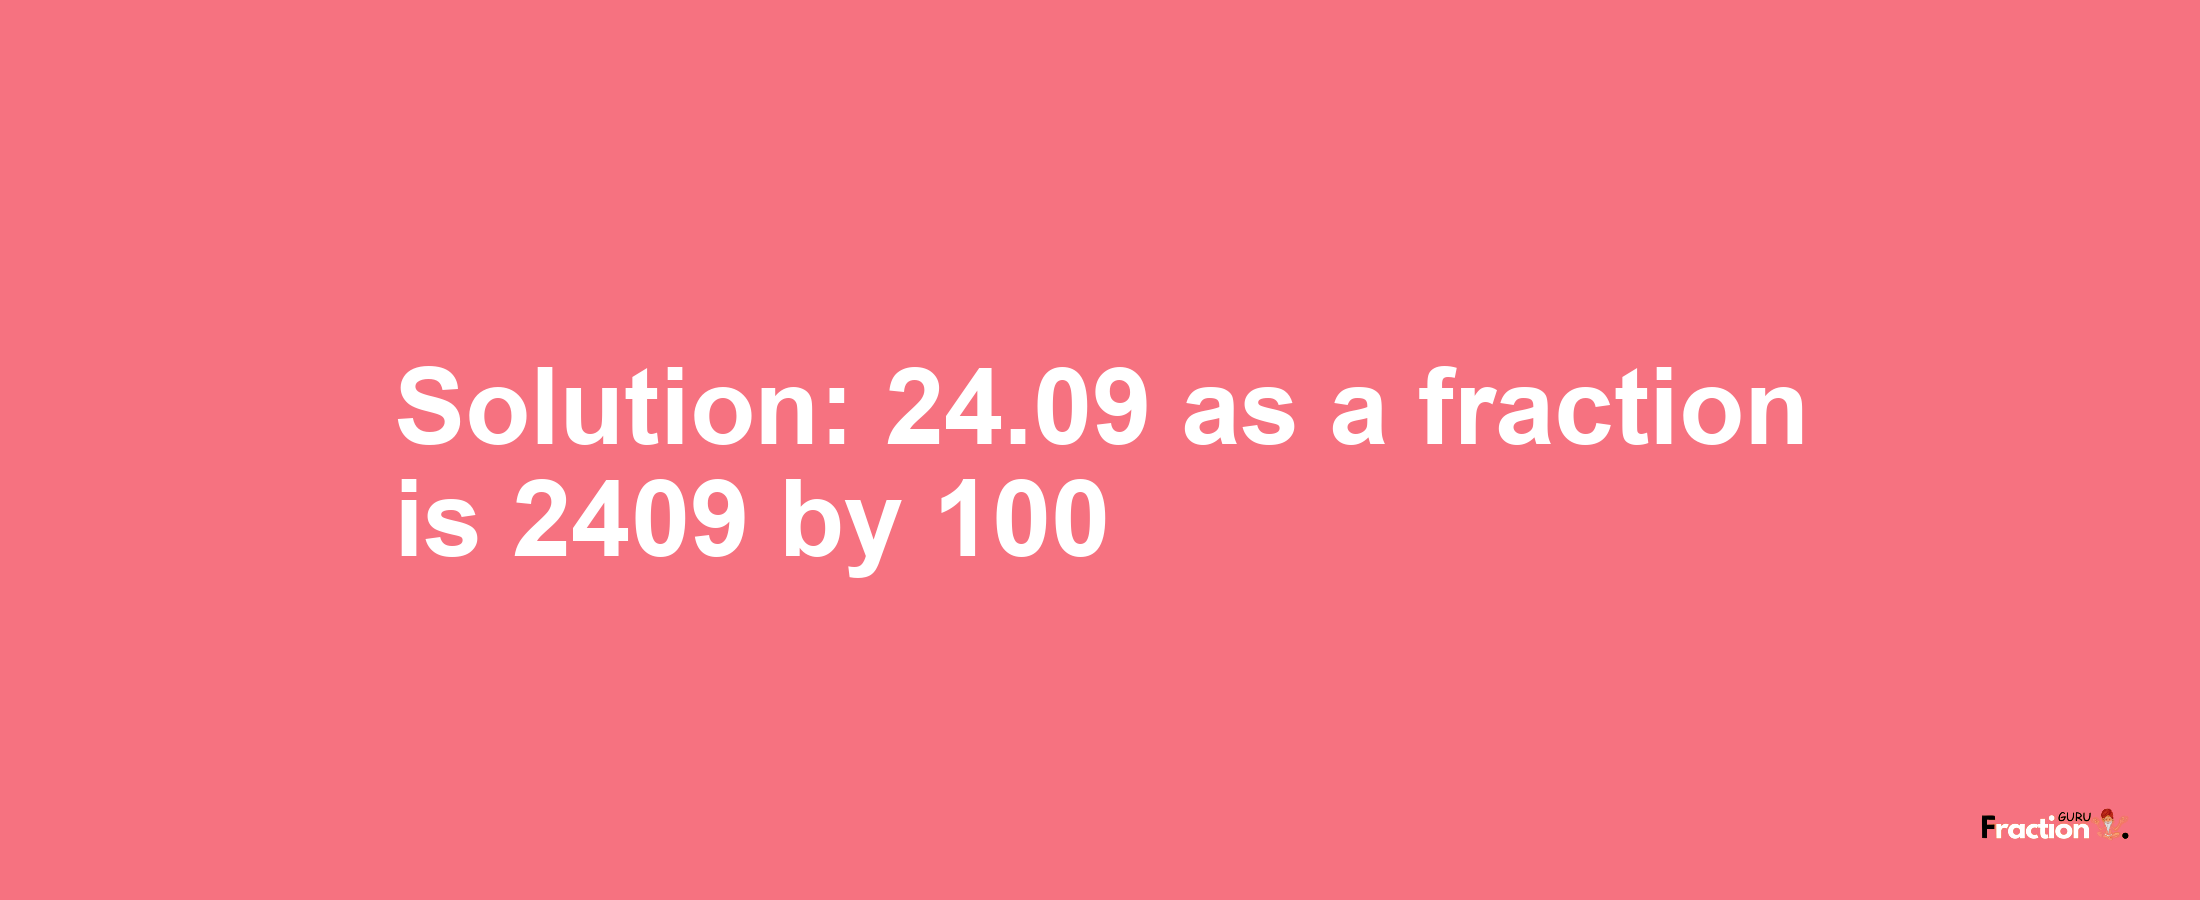 Solution:24.09 as a fraction is 2409/100